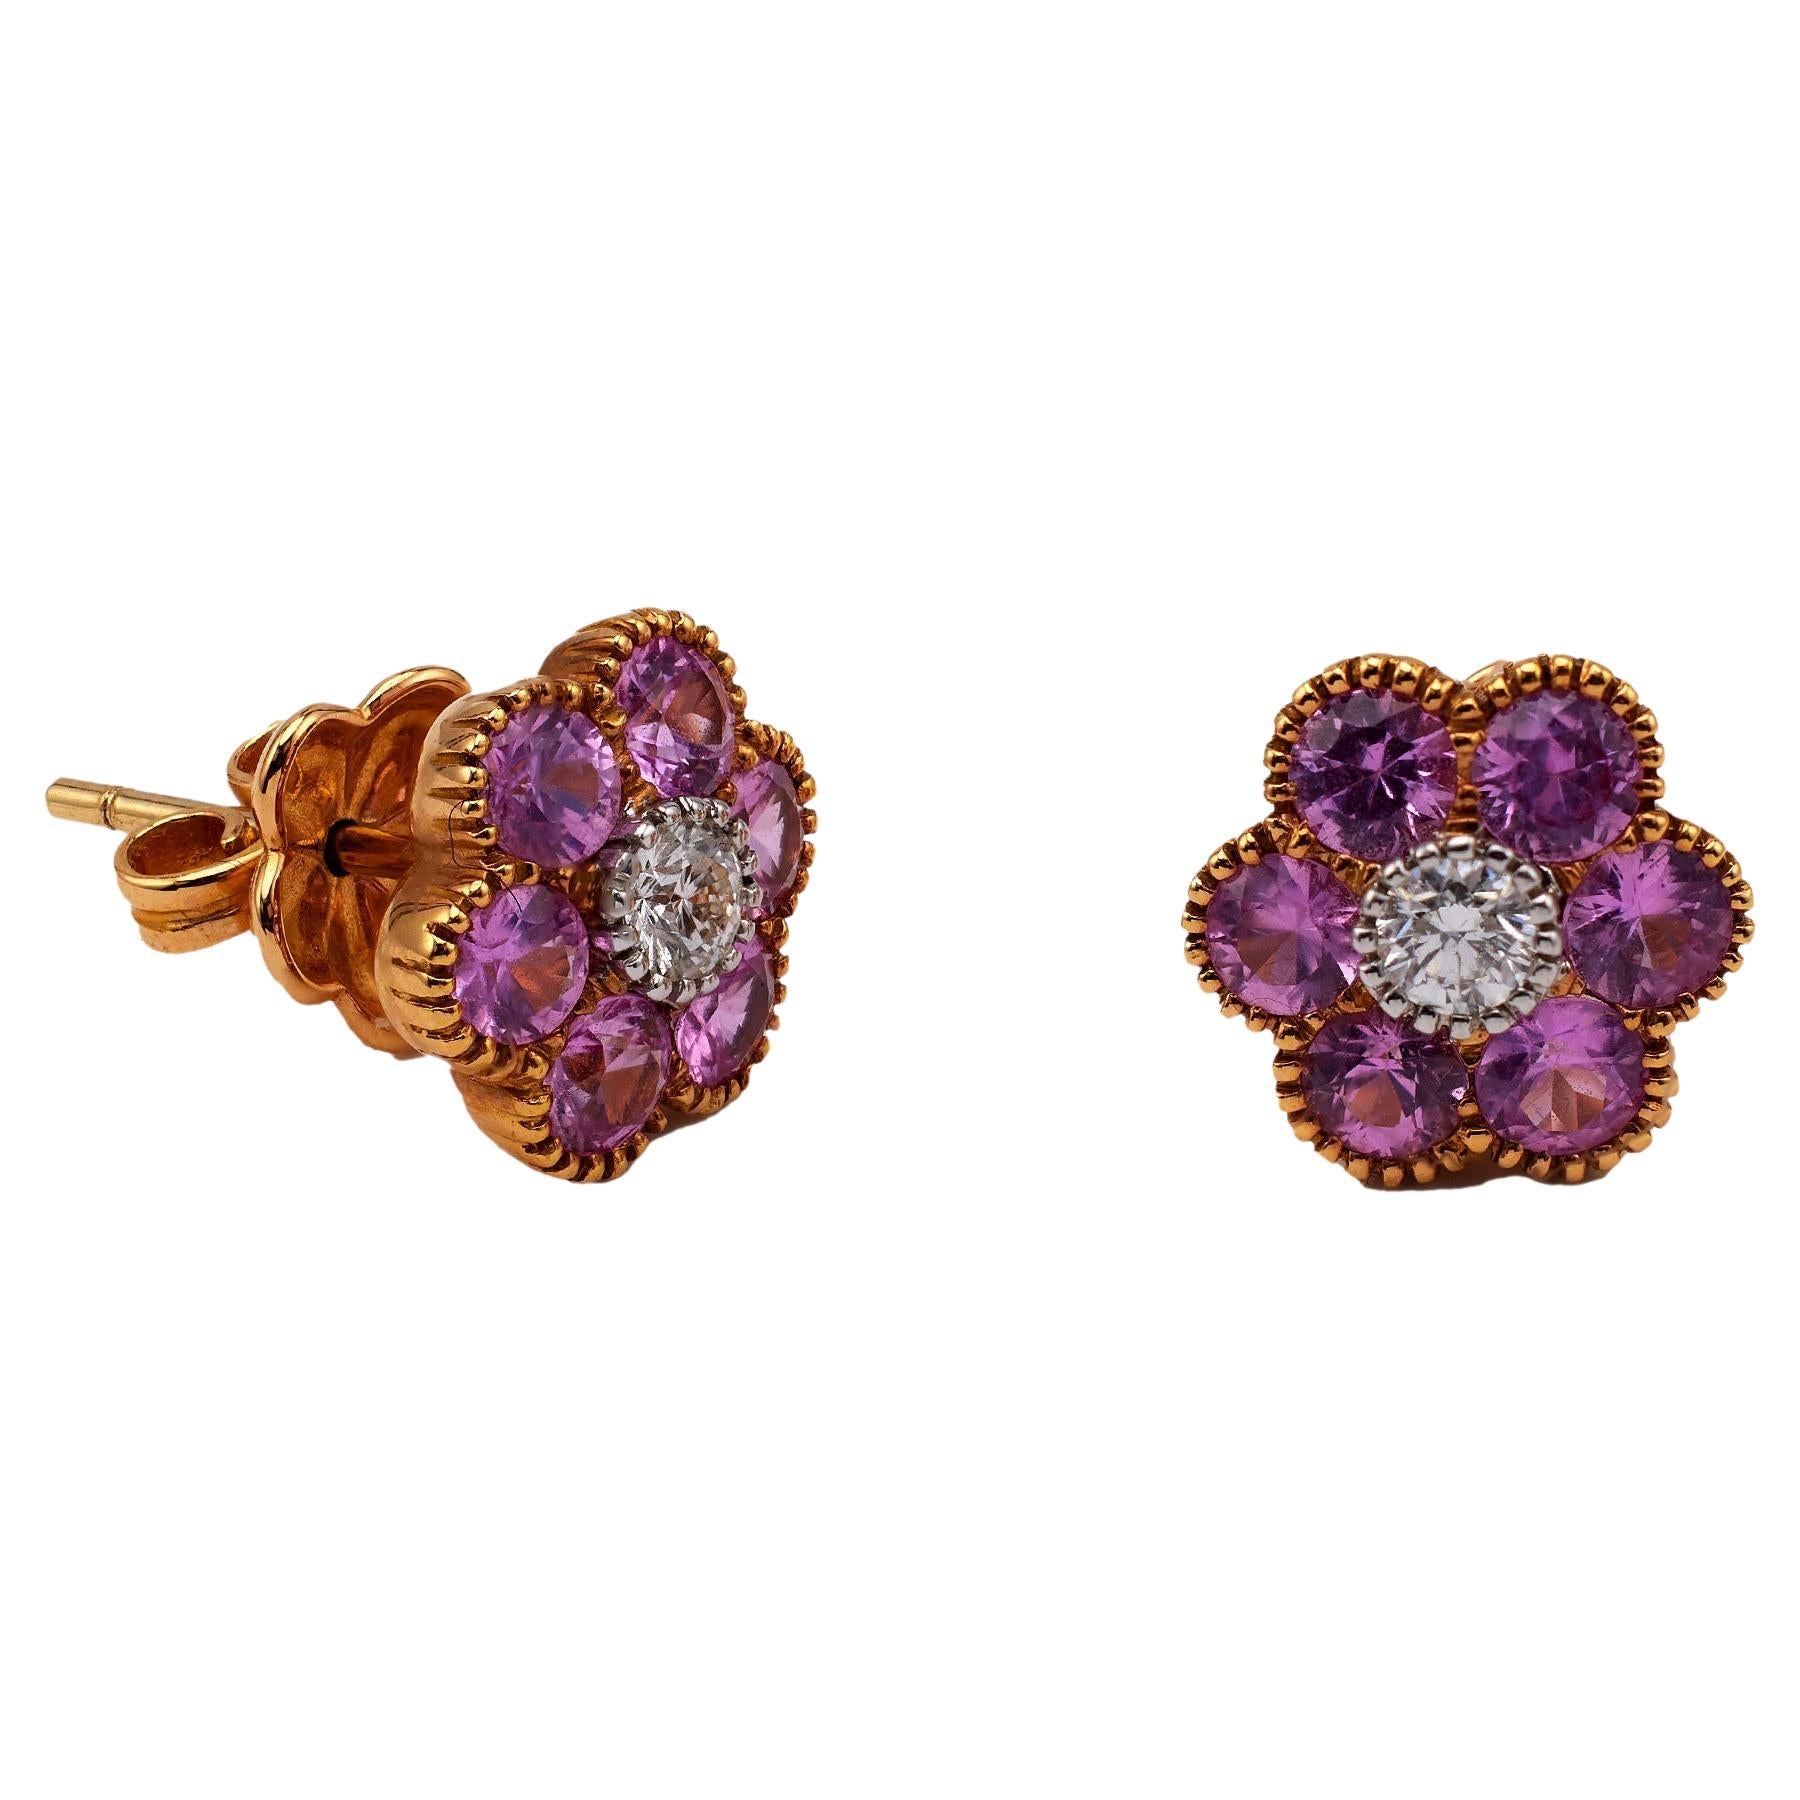 Pair of Vintage Pink Sapphire and Diamond 18k Yellow Gold Earrings